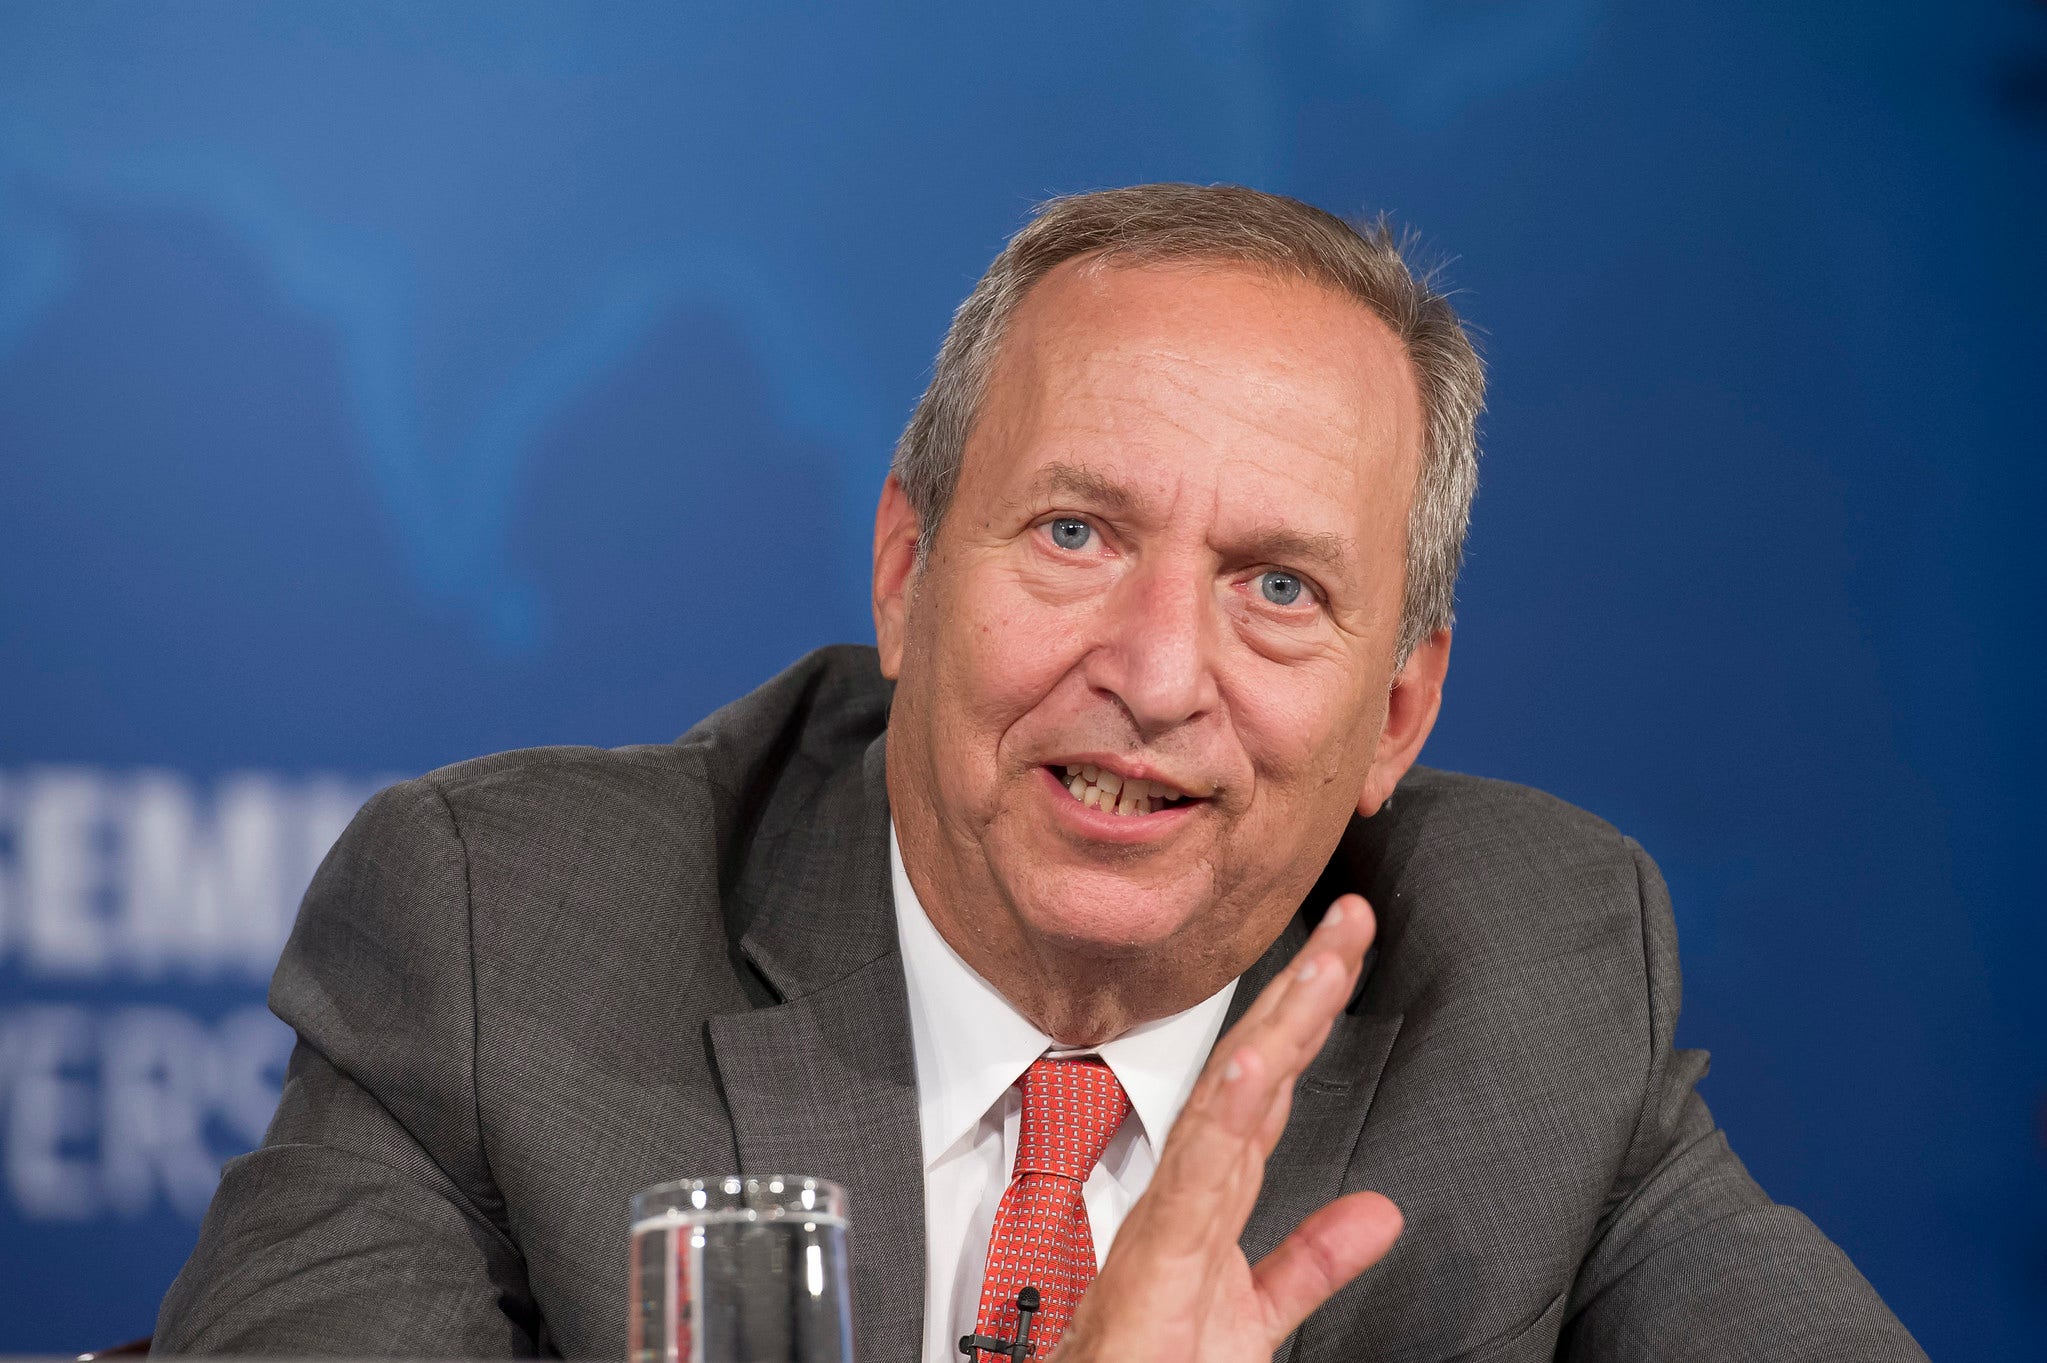 Larry Summers Says 'Long Way To Go' For Fed To Reach Inflation Targets:  'Much Harder Than People Think To Achieve Soft Landing'